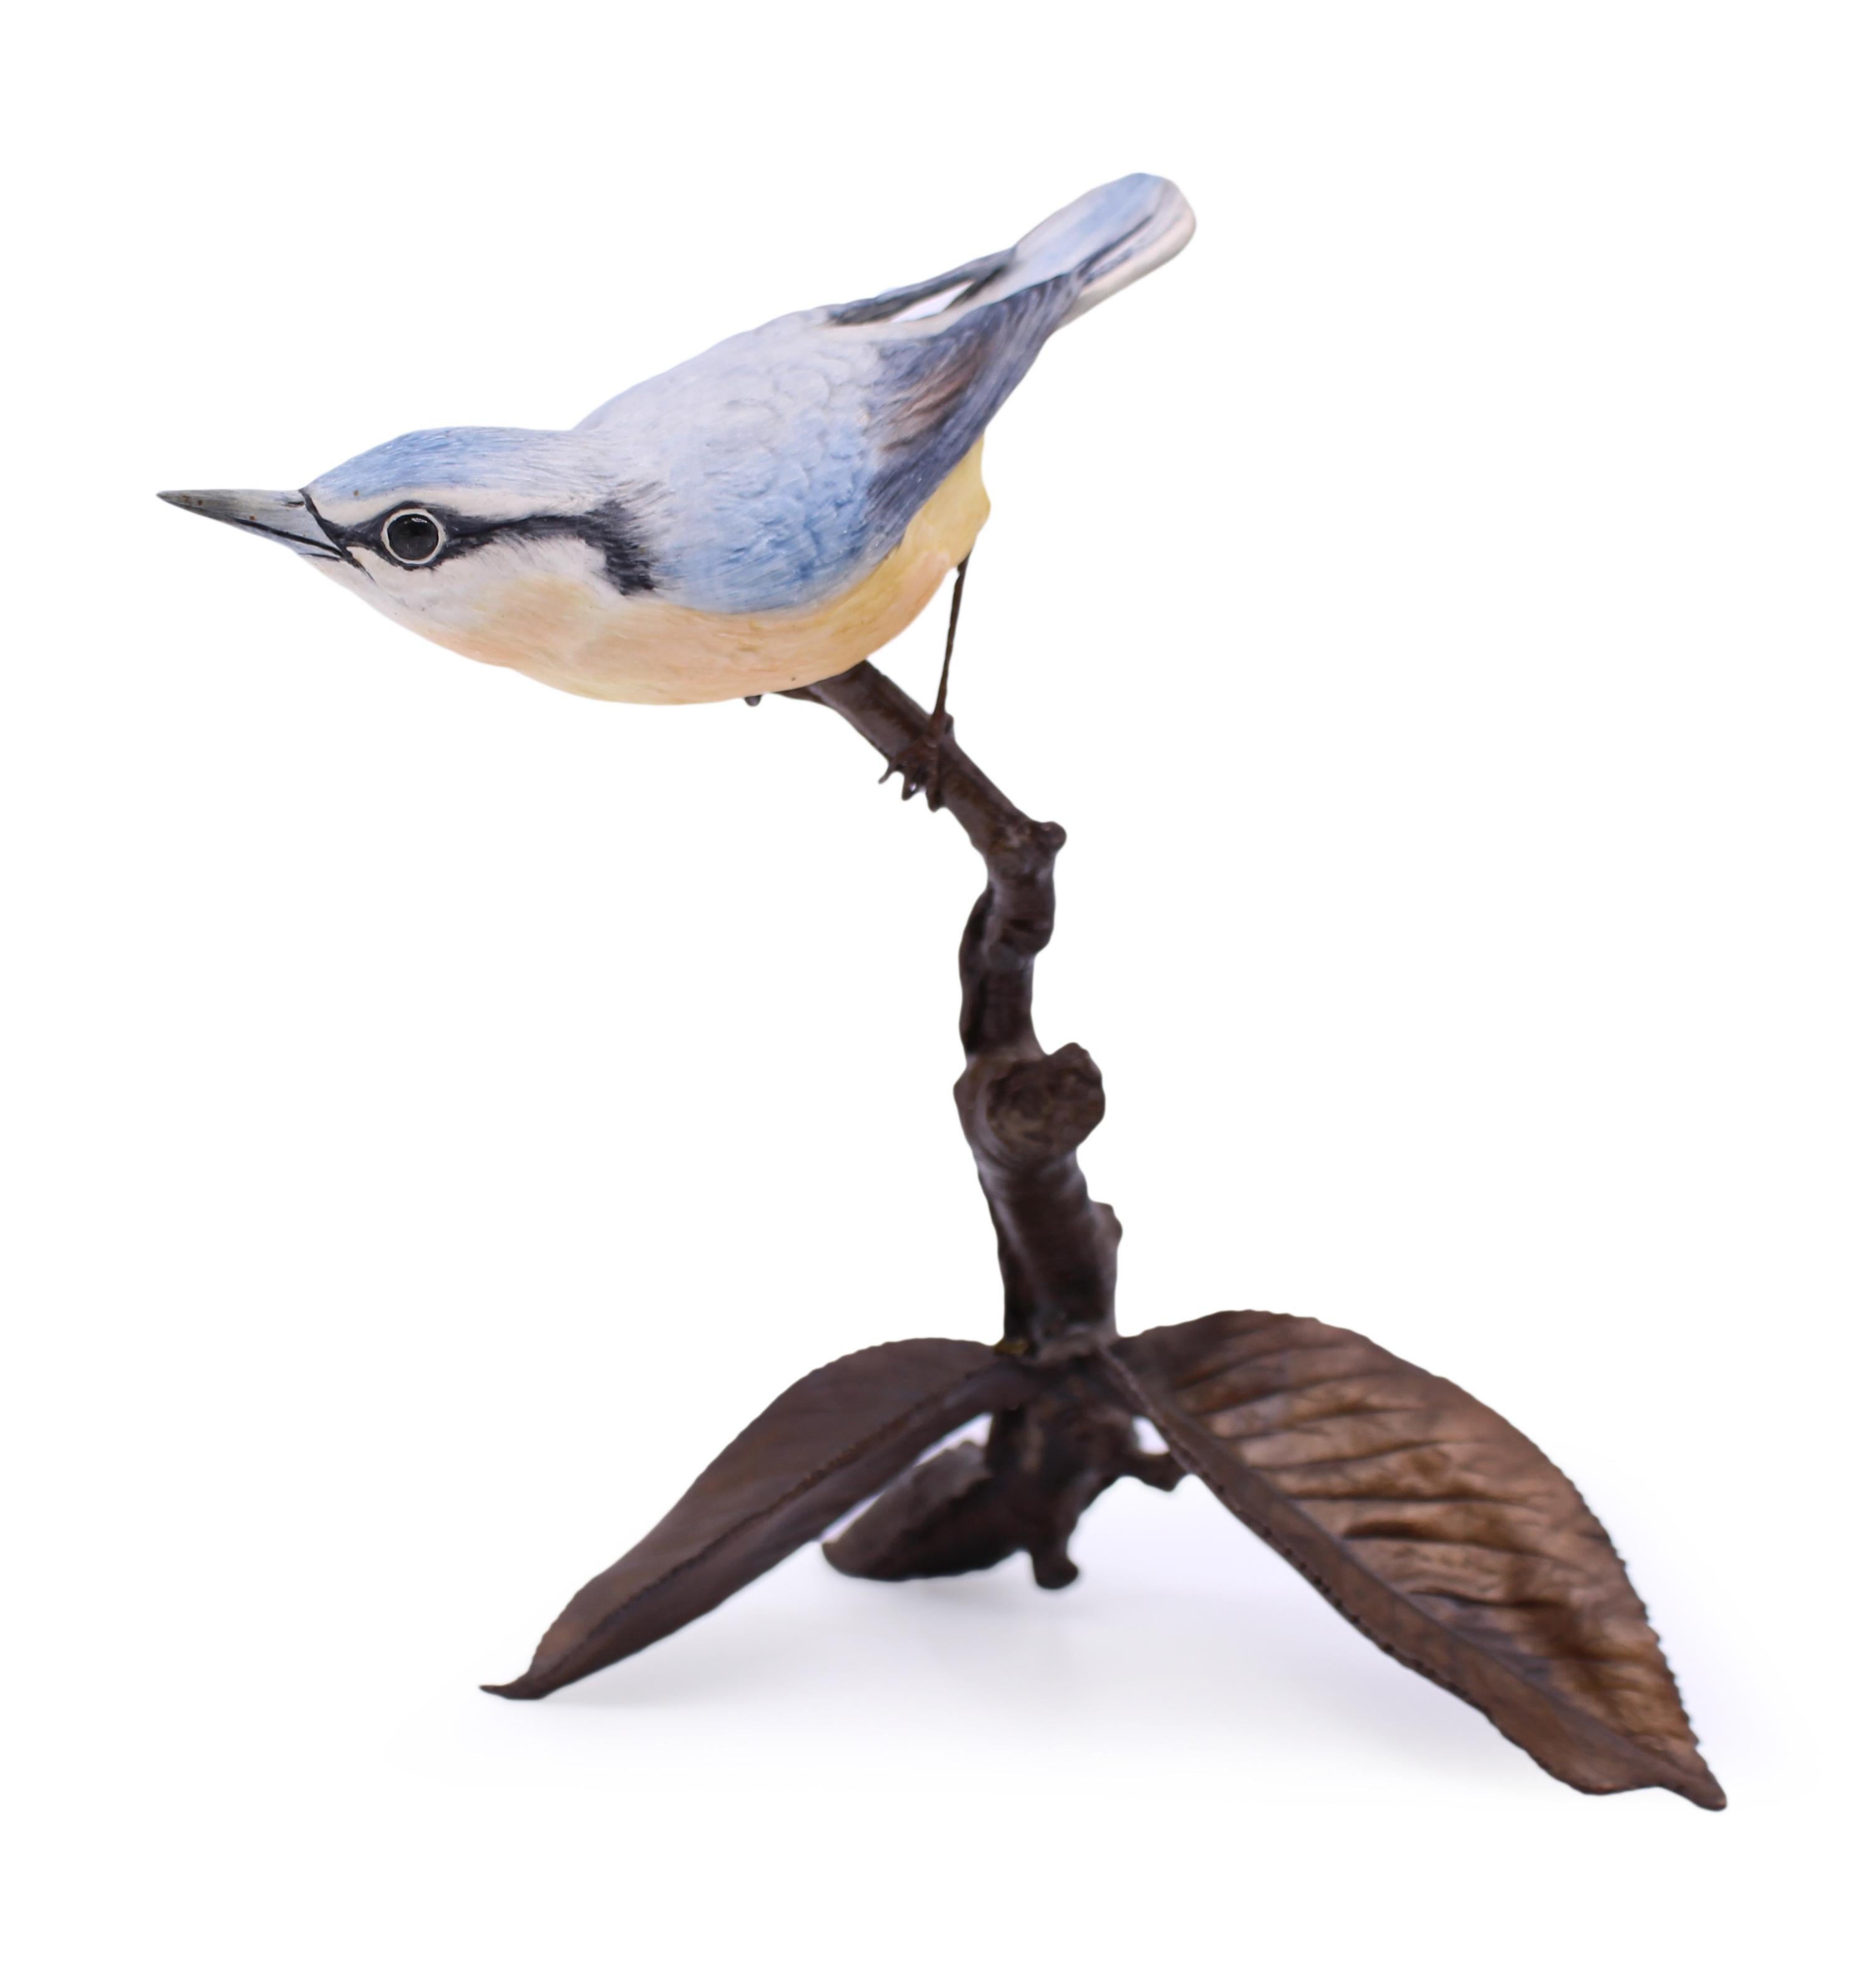 Albany Worcester County birds porcelain & bronze nuthatch


Albany Fine China Ltd England, Worcester

Nuthatch from the County Birds series

Measures: Height 16 cm / 6 1/4 in

Condition Very good condition; free from chips, cracks or